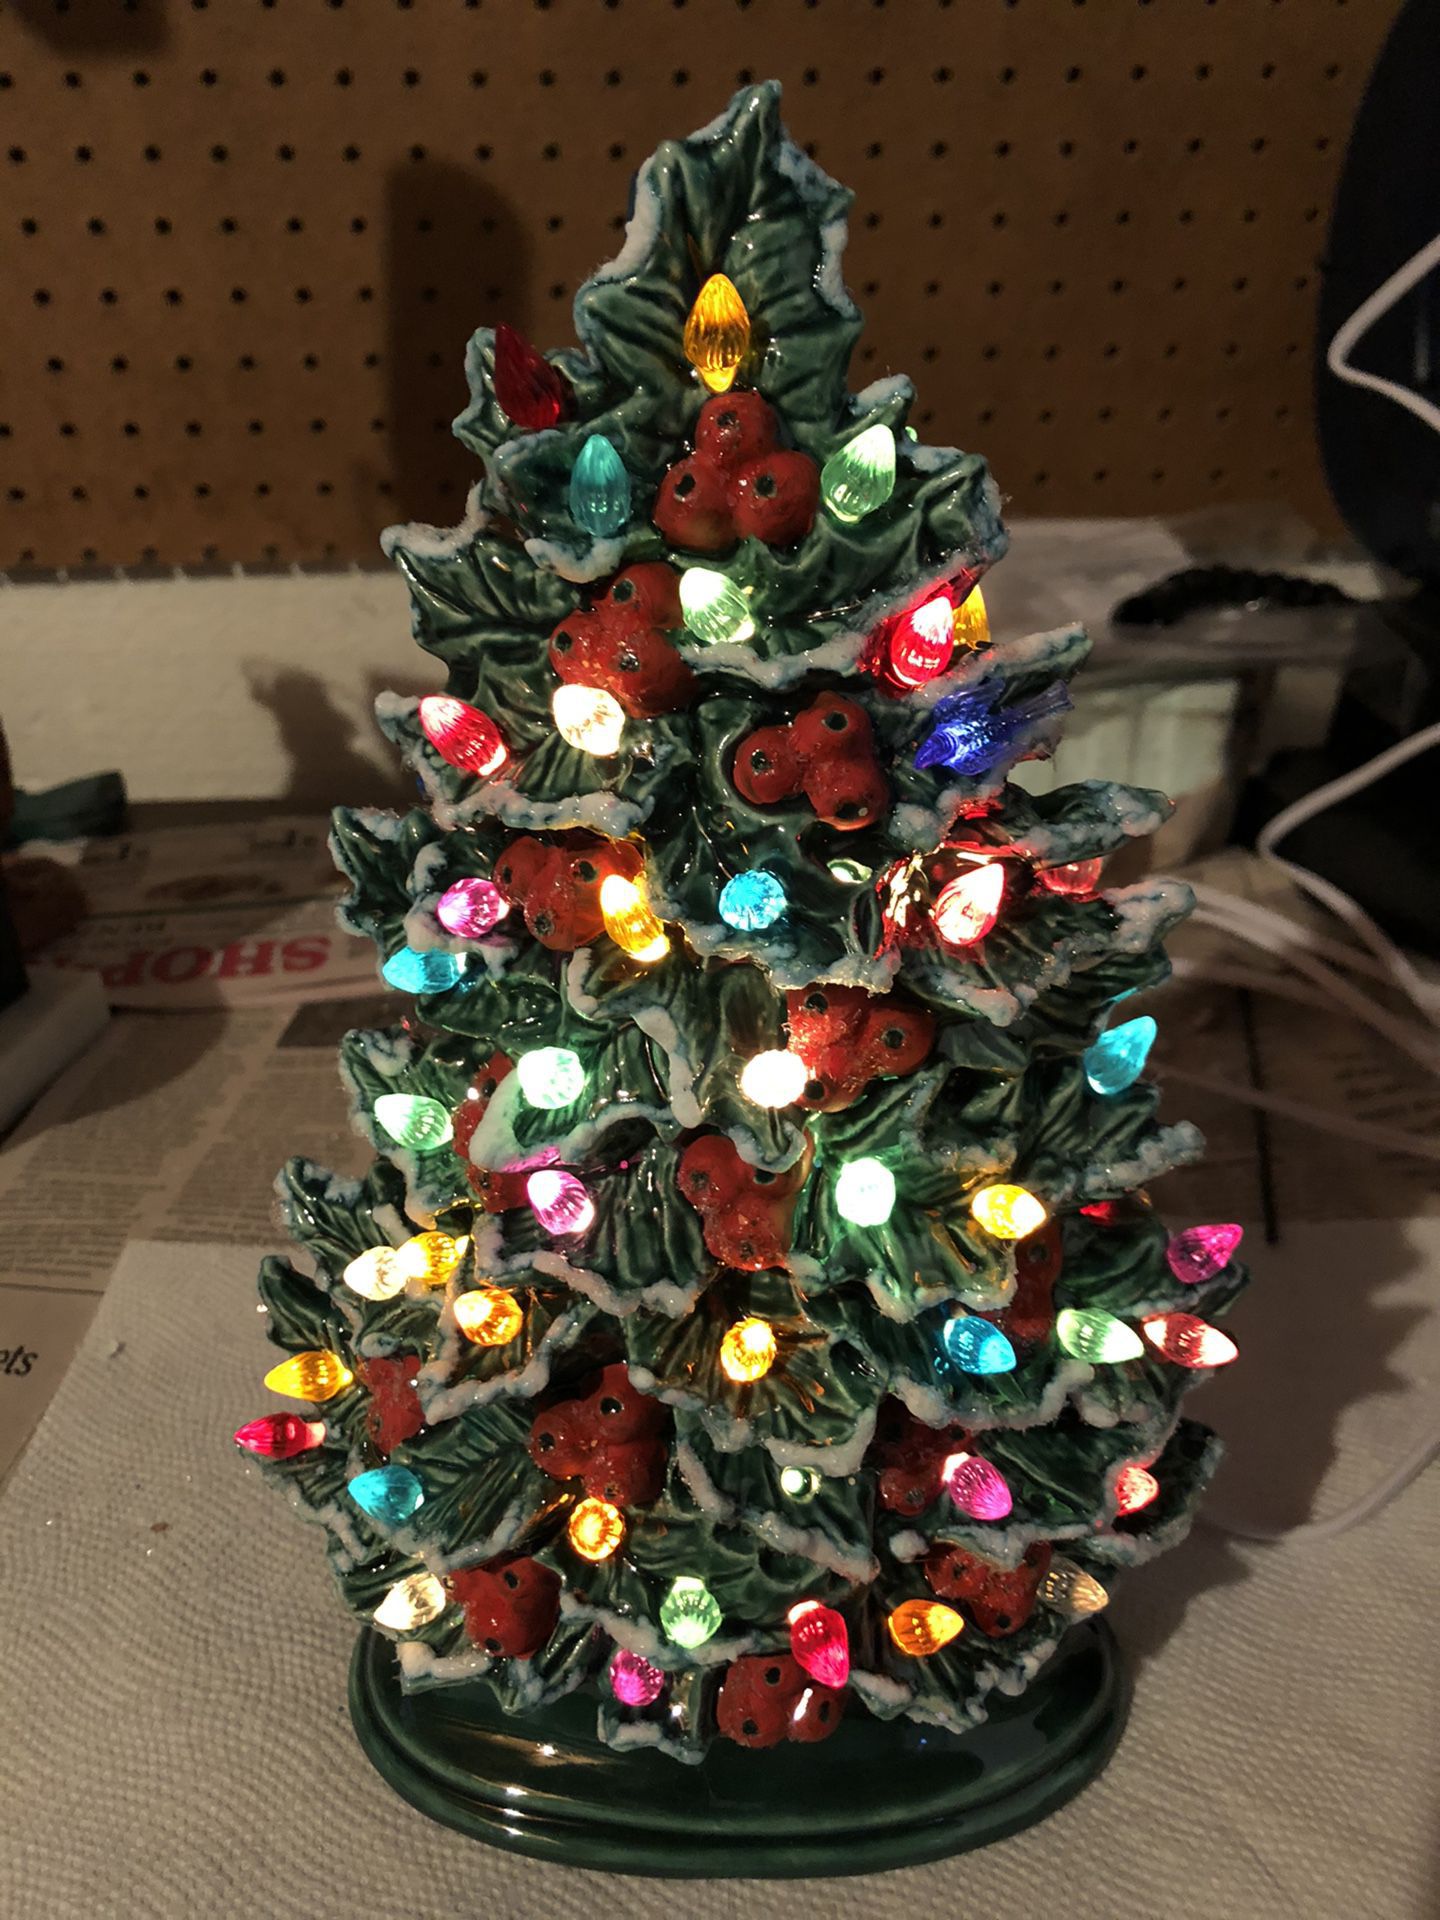 Holly Christmas Tree 11 Inches Tall 18 Inches Around. Great Christmas Gift! New$45.00 Handmade